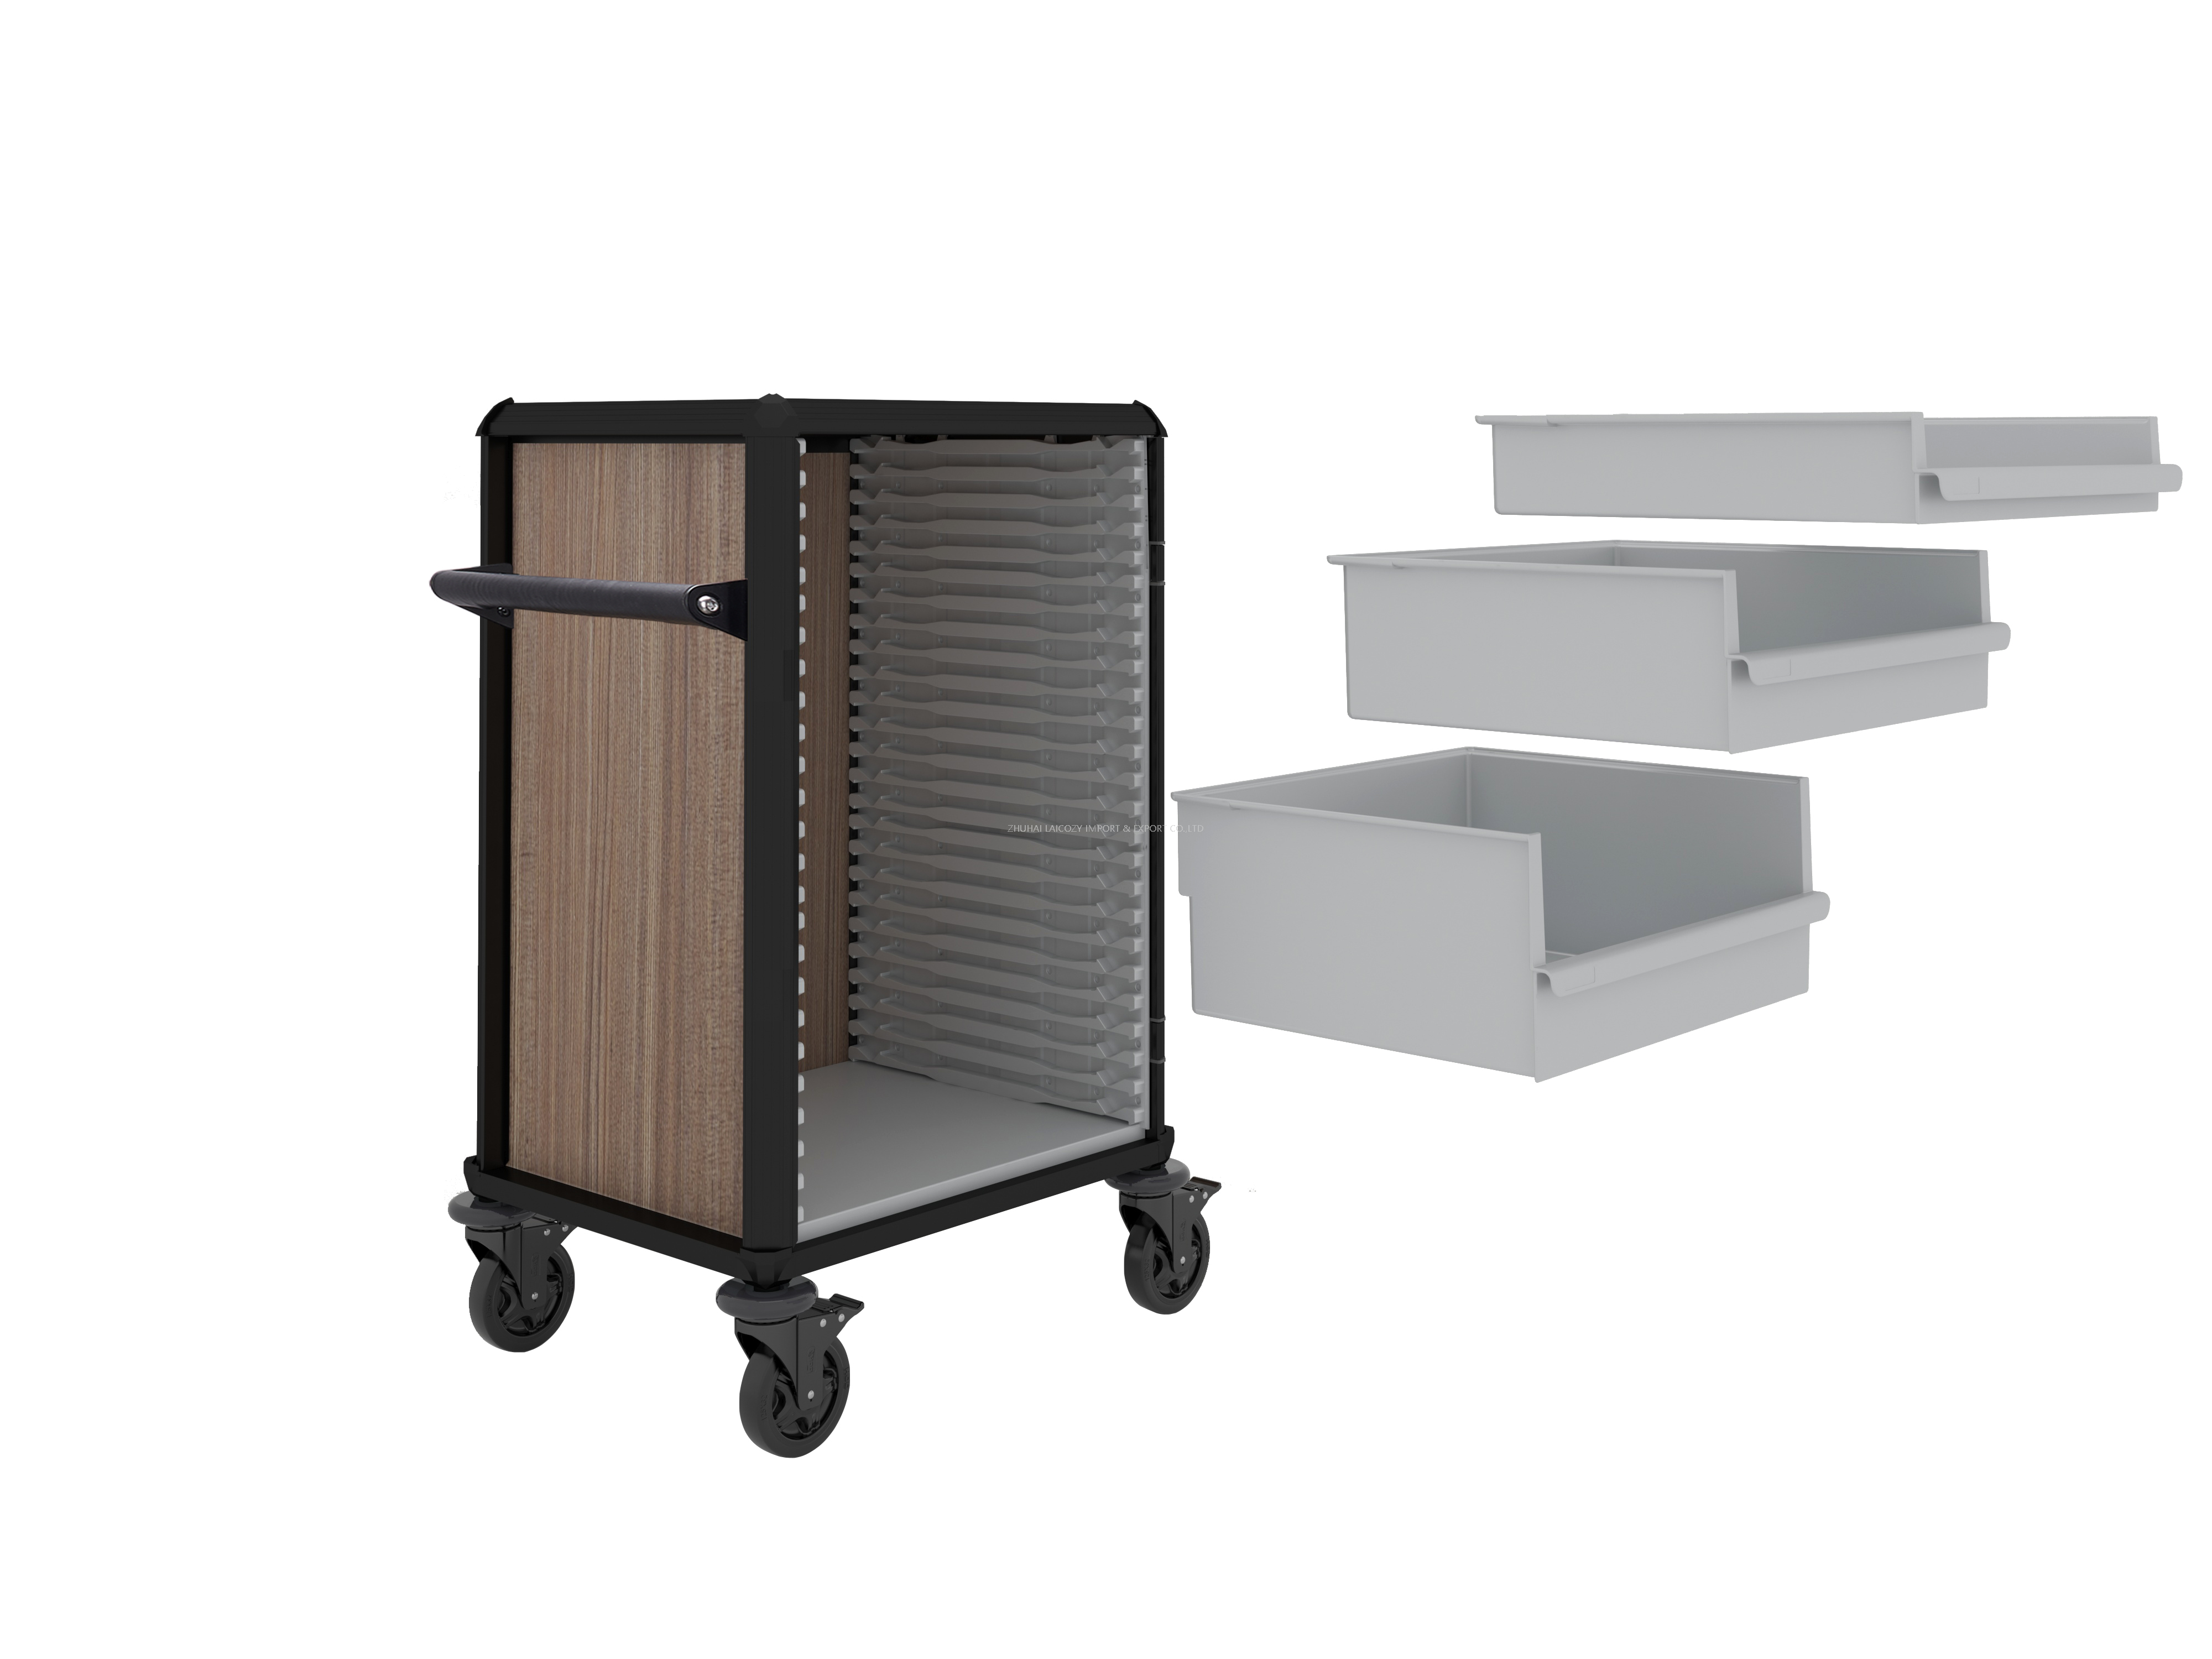  Aluminium Heavy Duty Housekeeping Trolley Multi-function Maid Cart with Removable Drawers